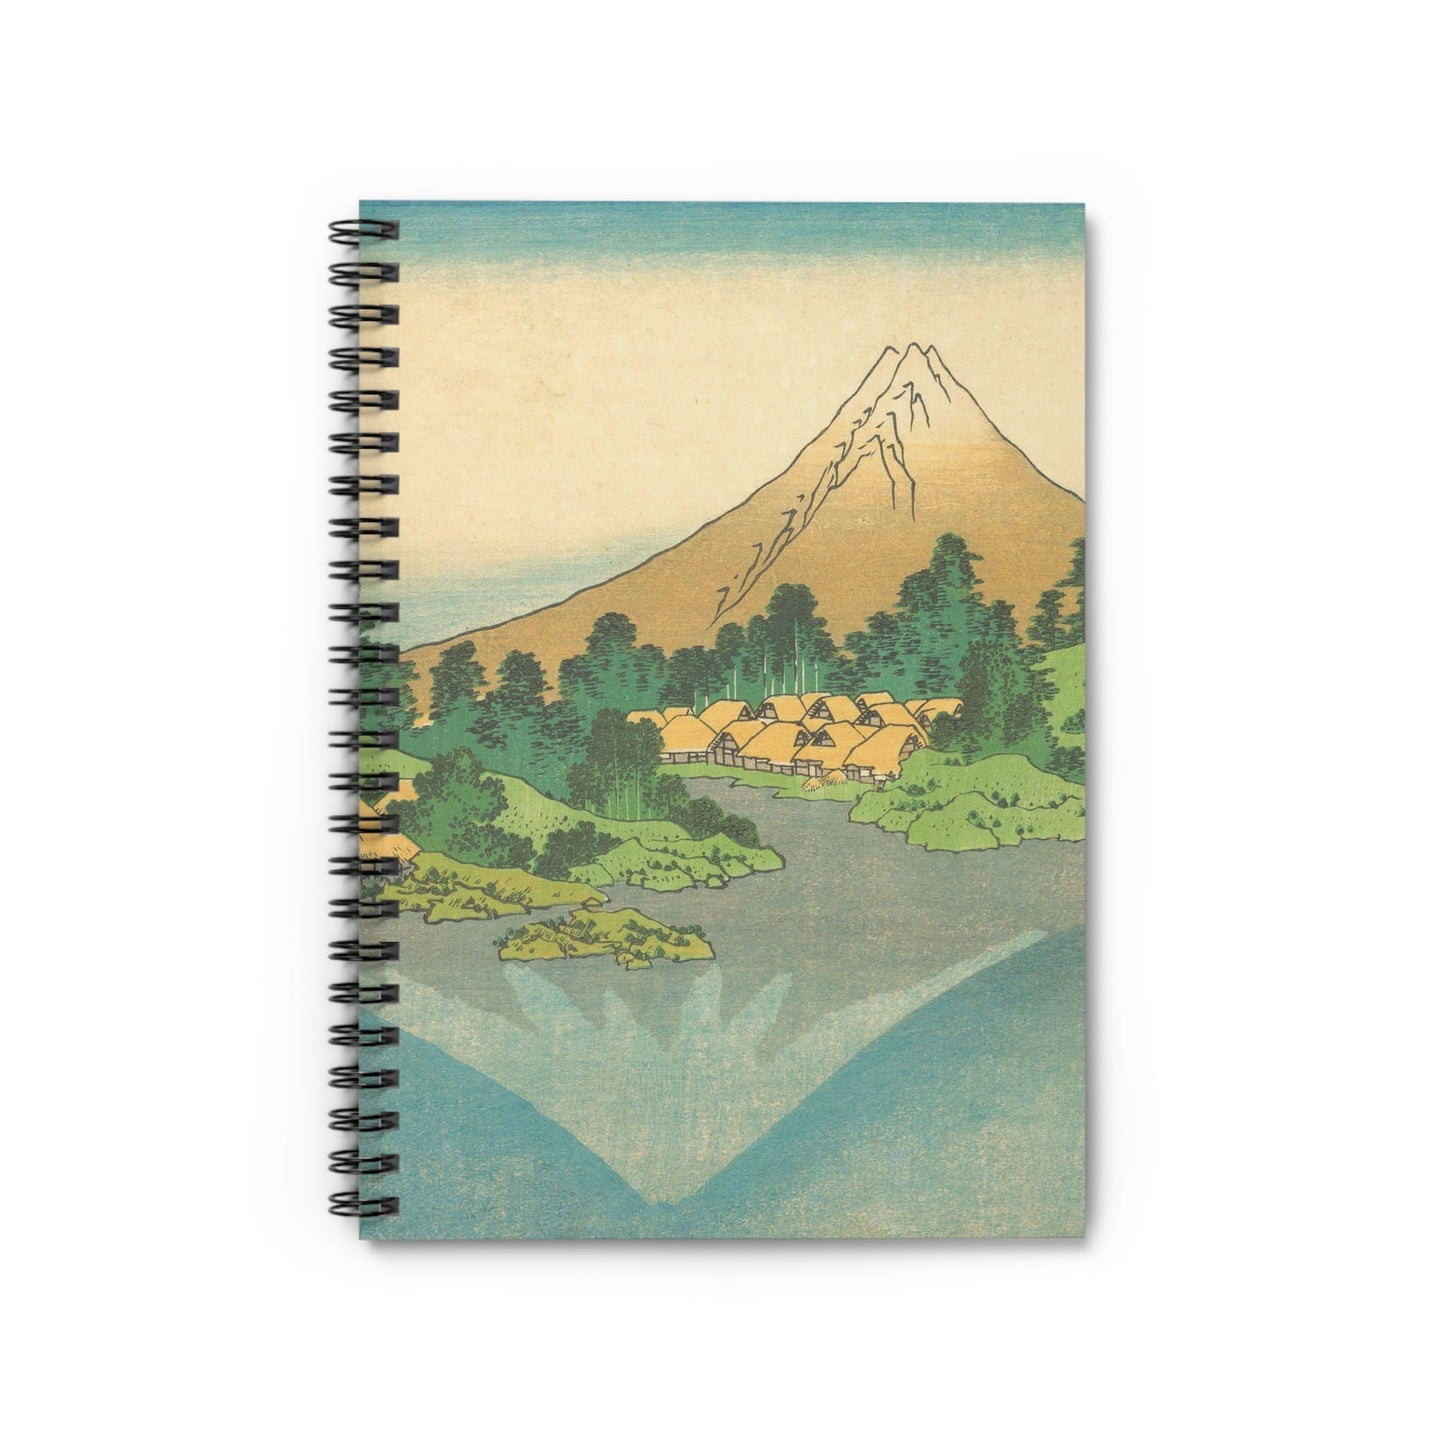 Mount Fuji Reflection Notebook with Japanese cover, great for journaling and planning, highlighting the serene reflection of Mount Fuji.